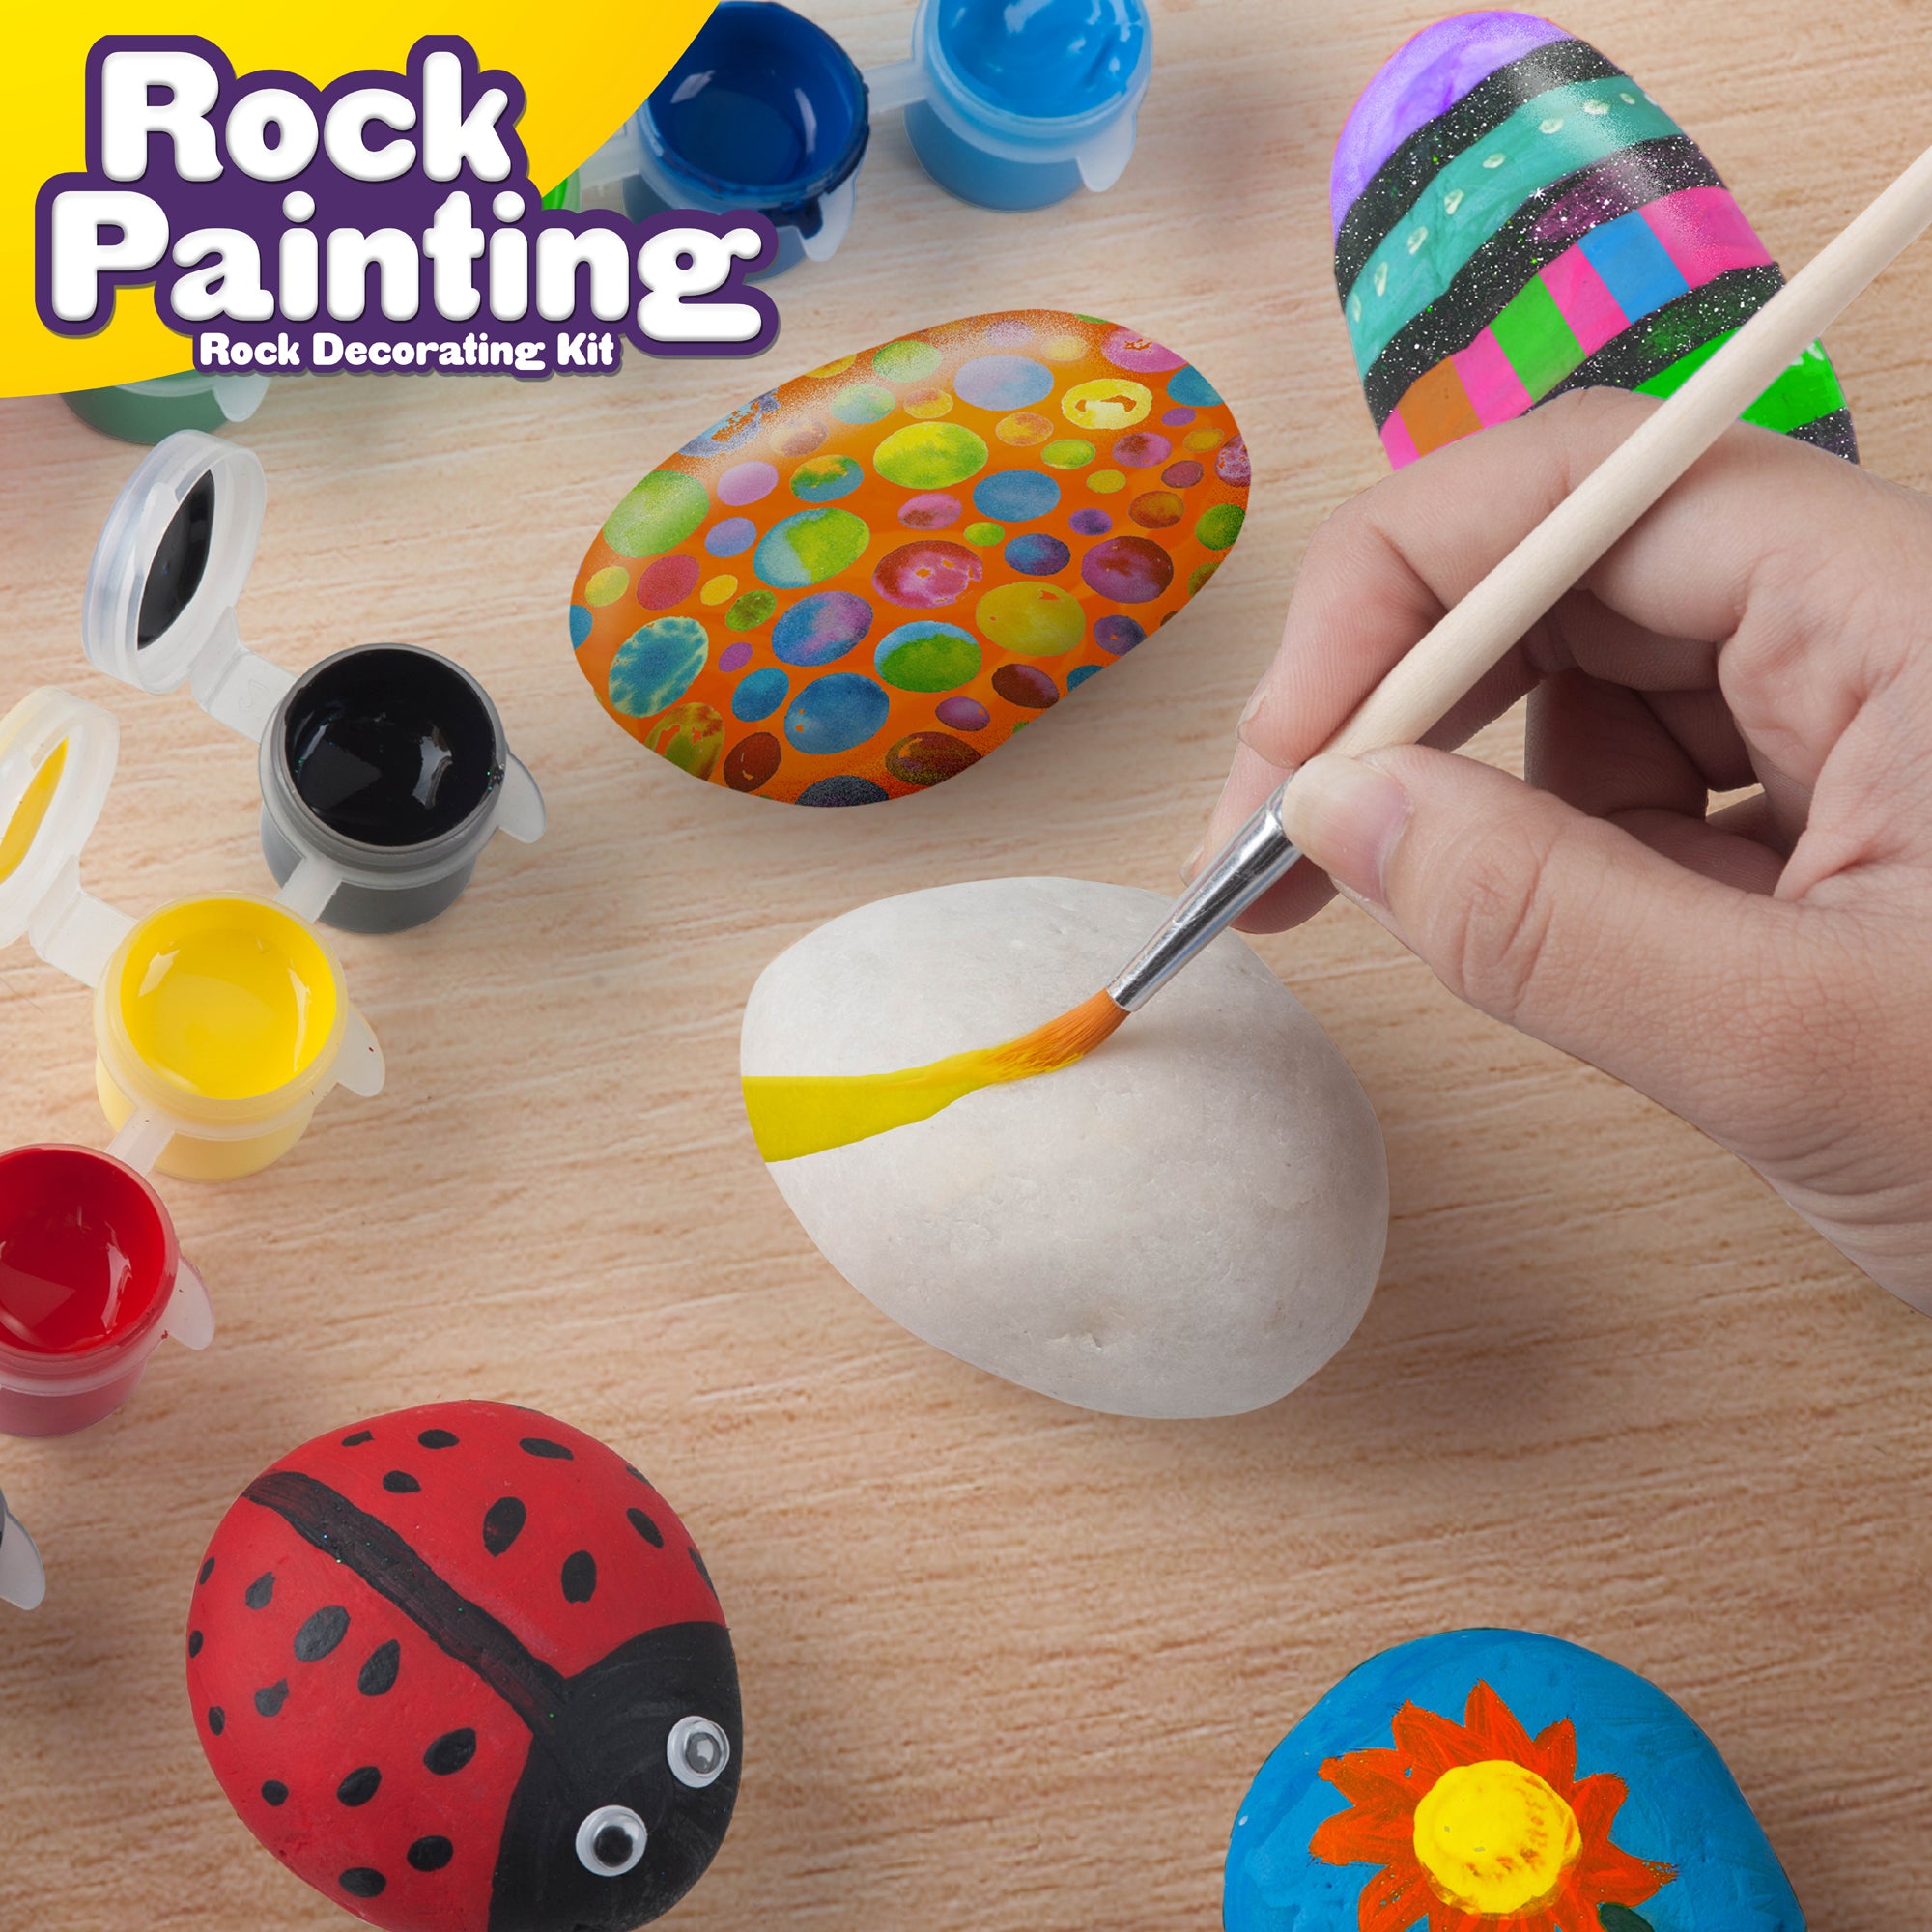 Make your Own Crafty Rock Painting Kit! – Sustain My Craft Habit